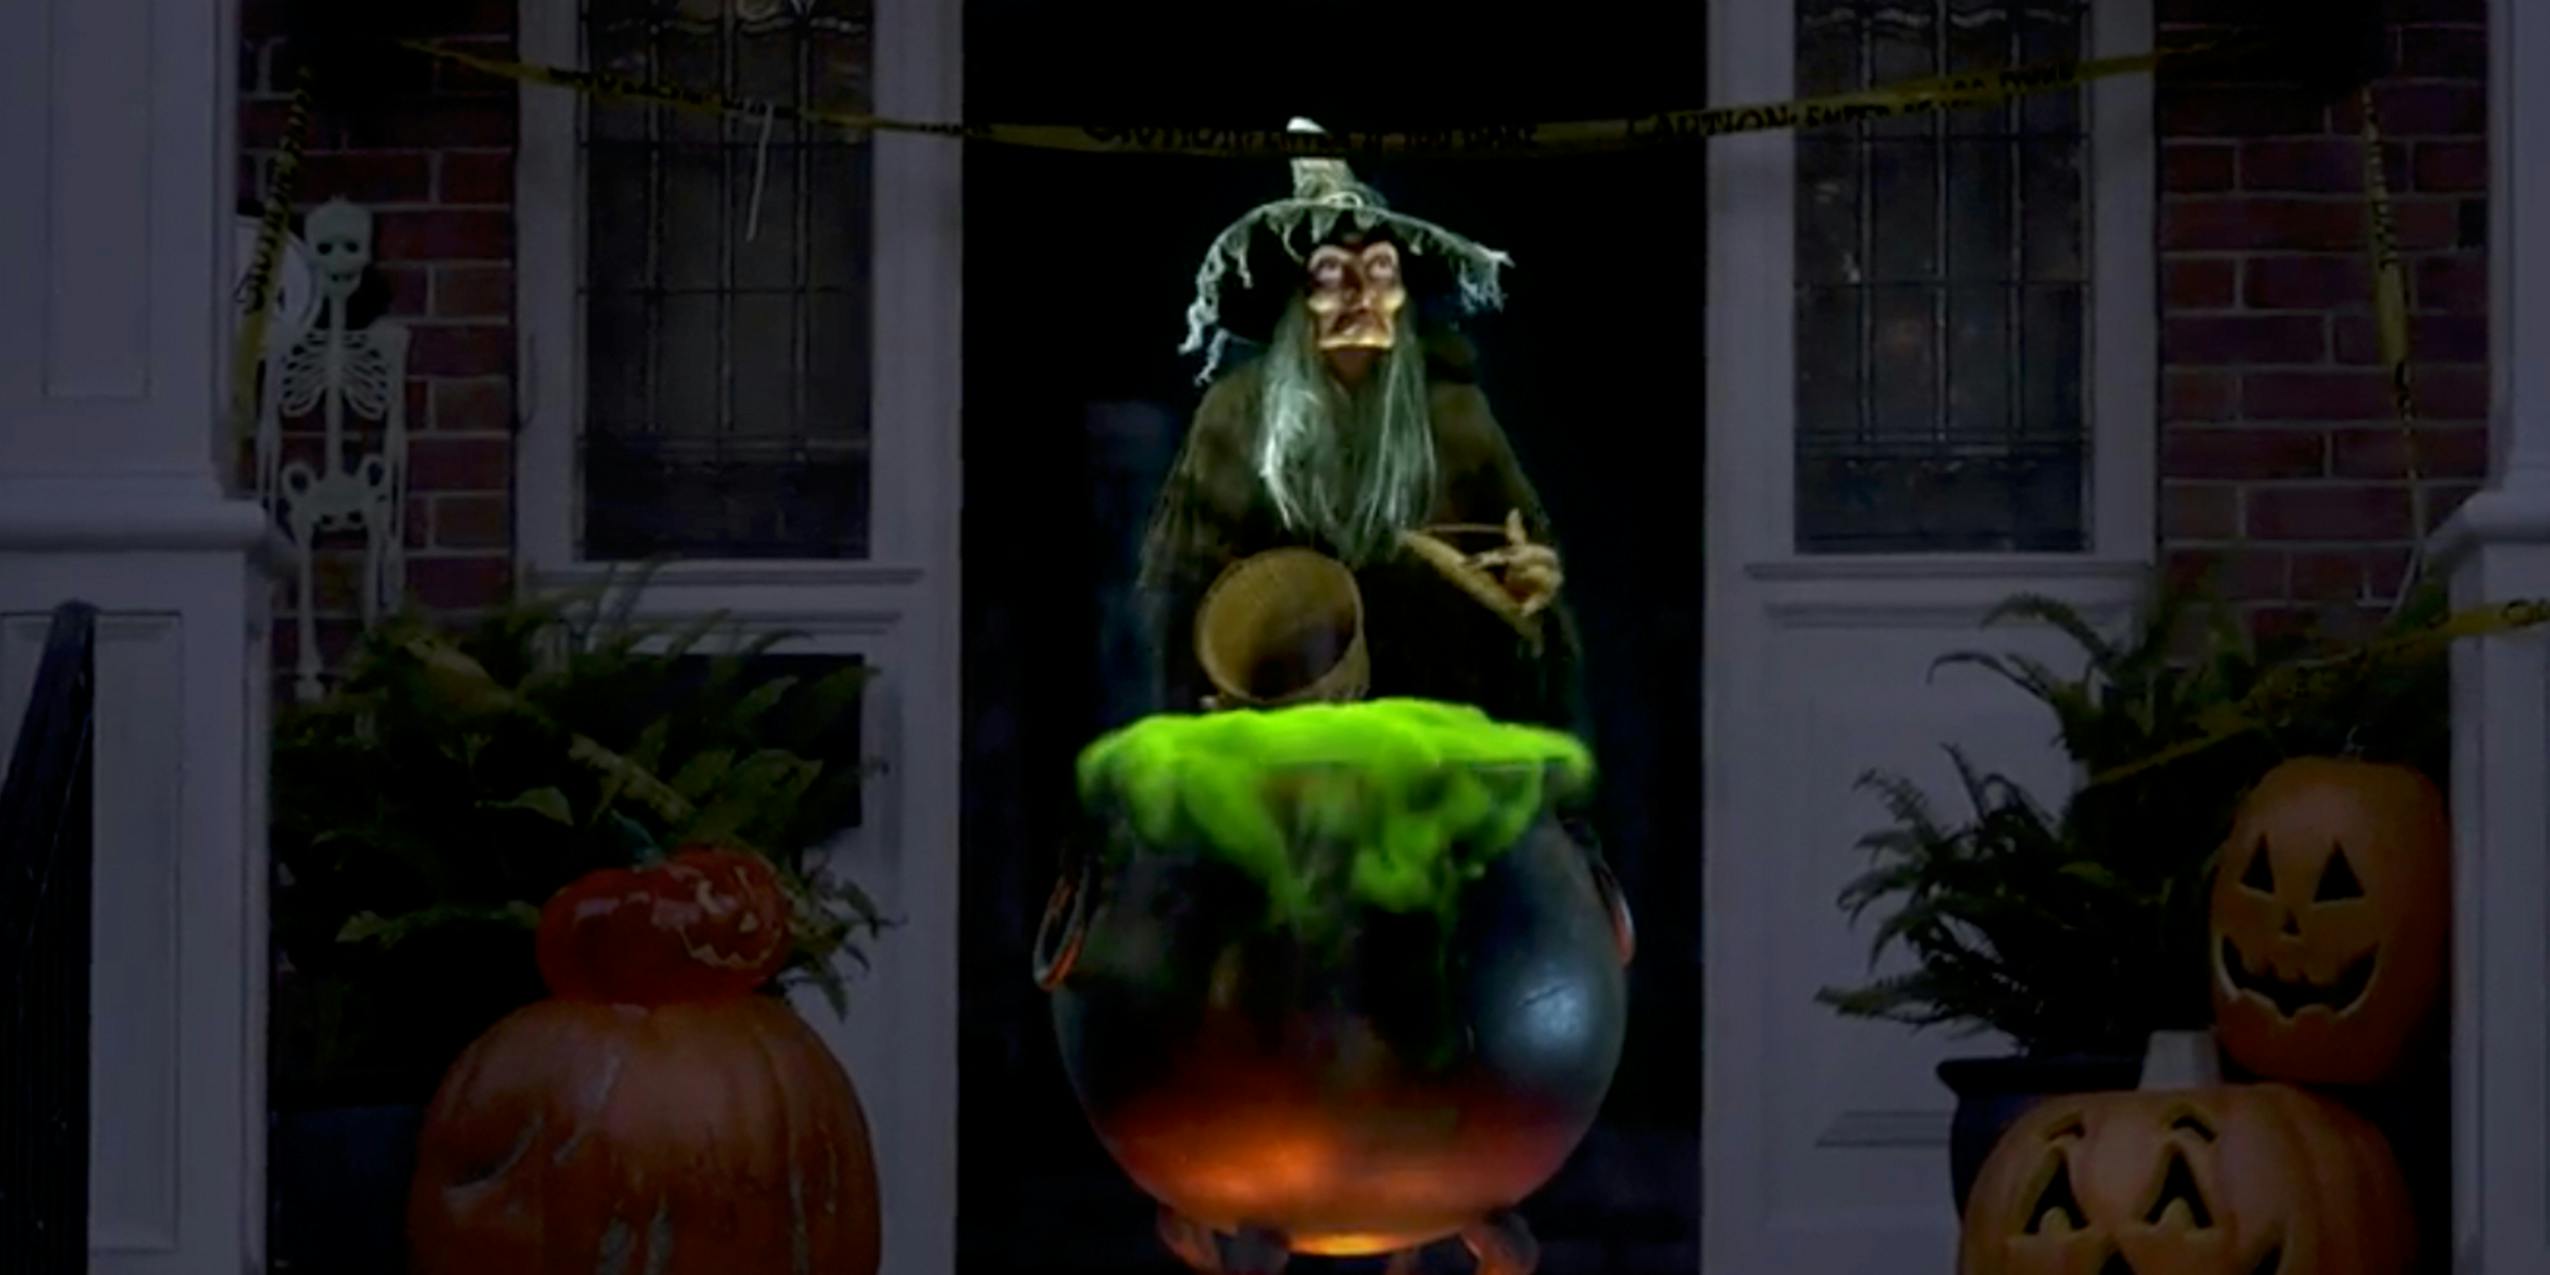 Charming witch projected into doorway